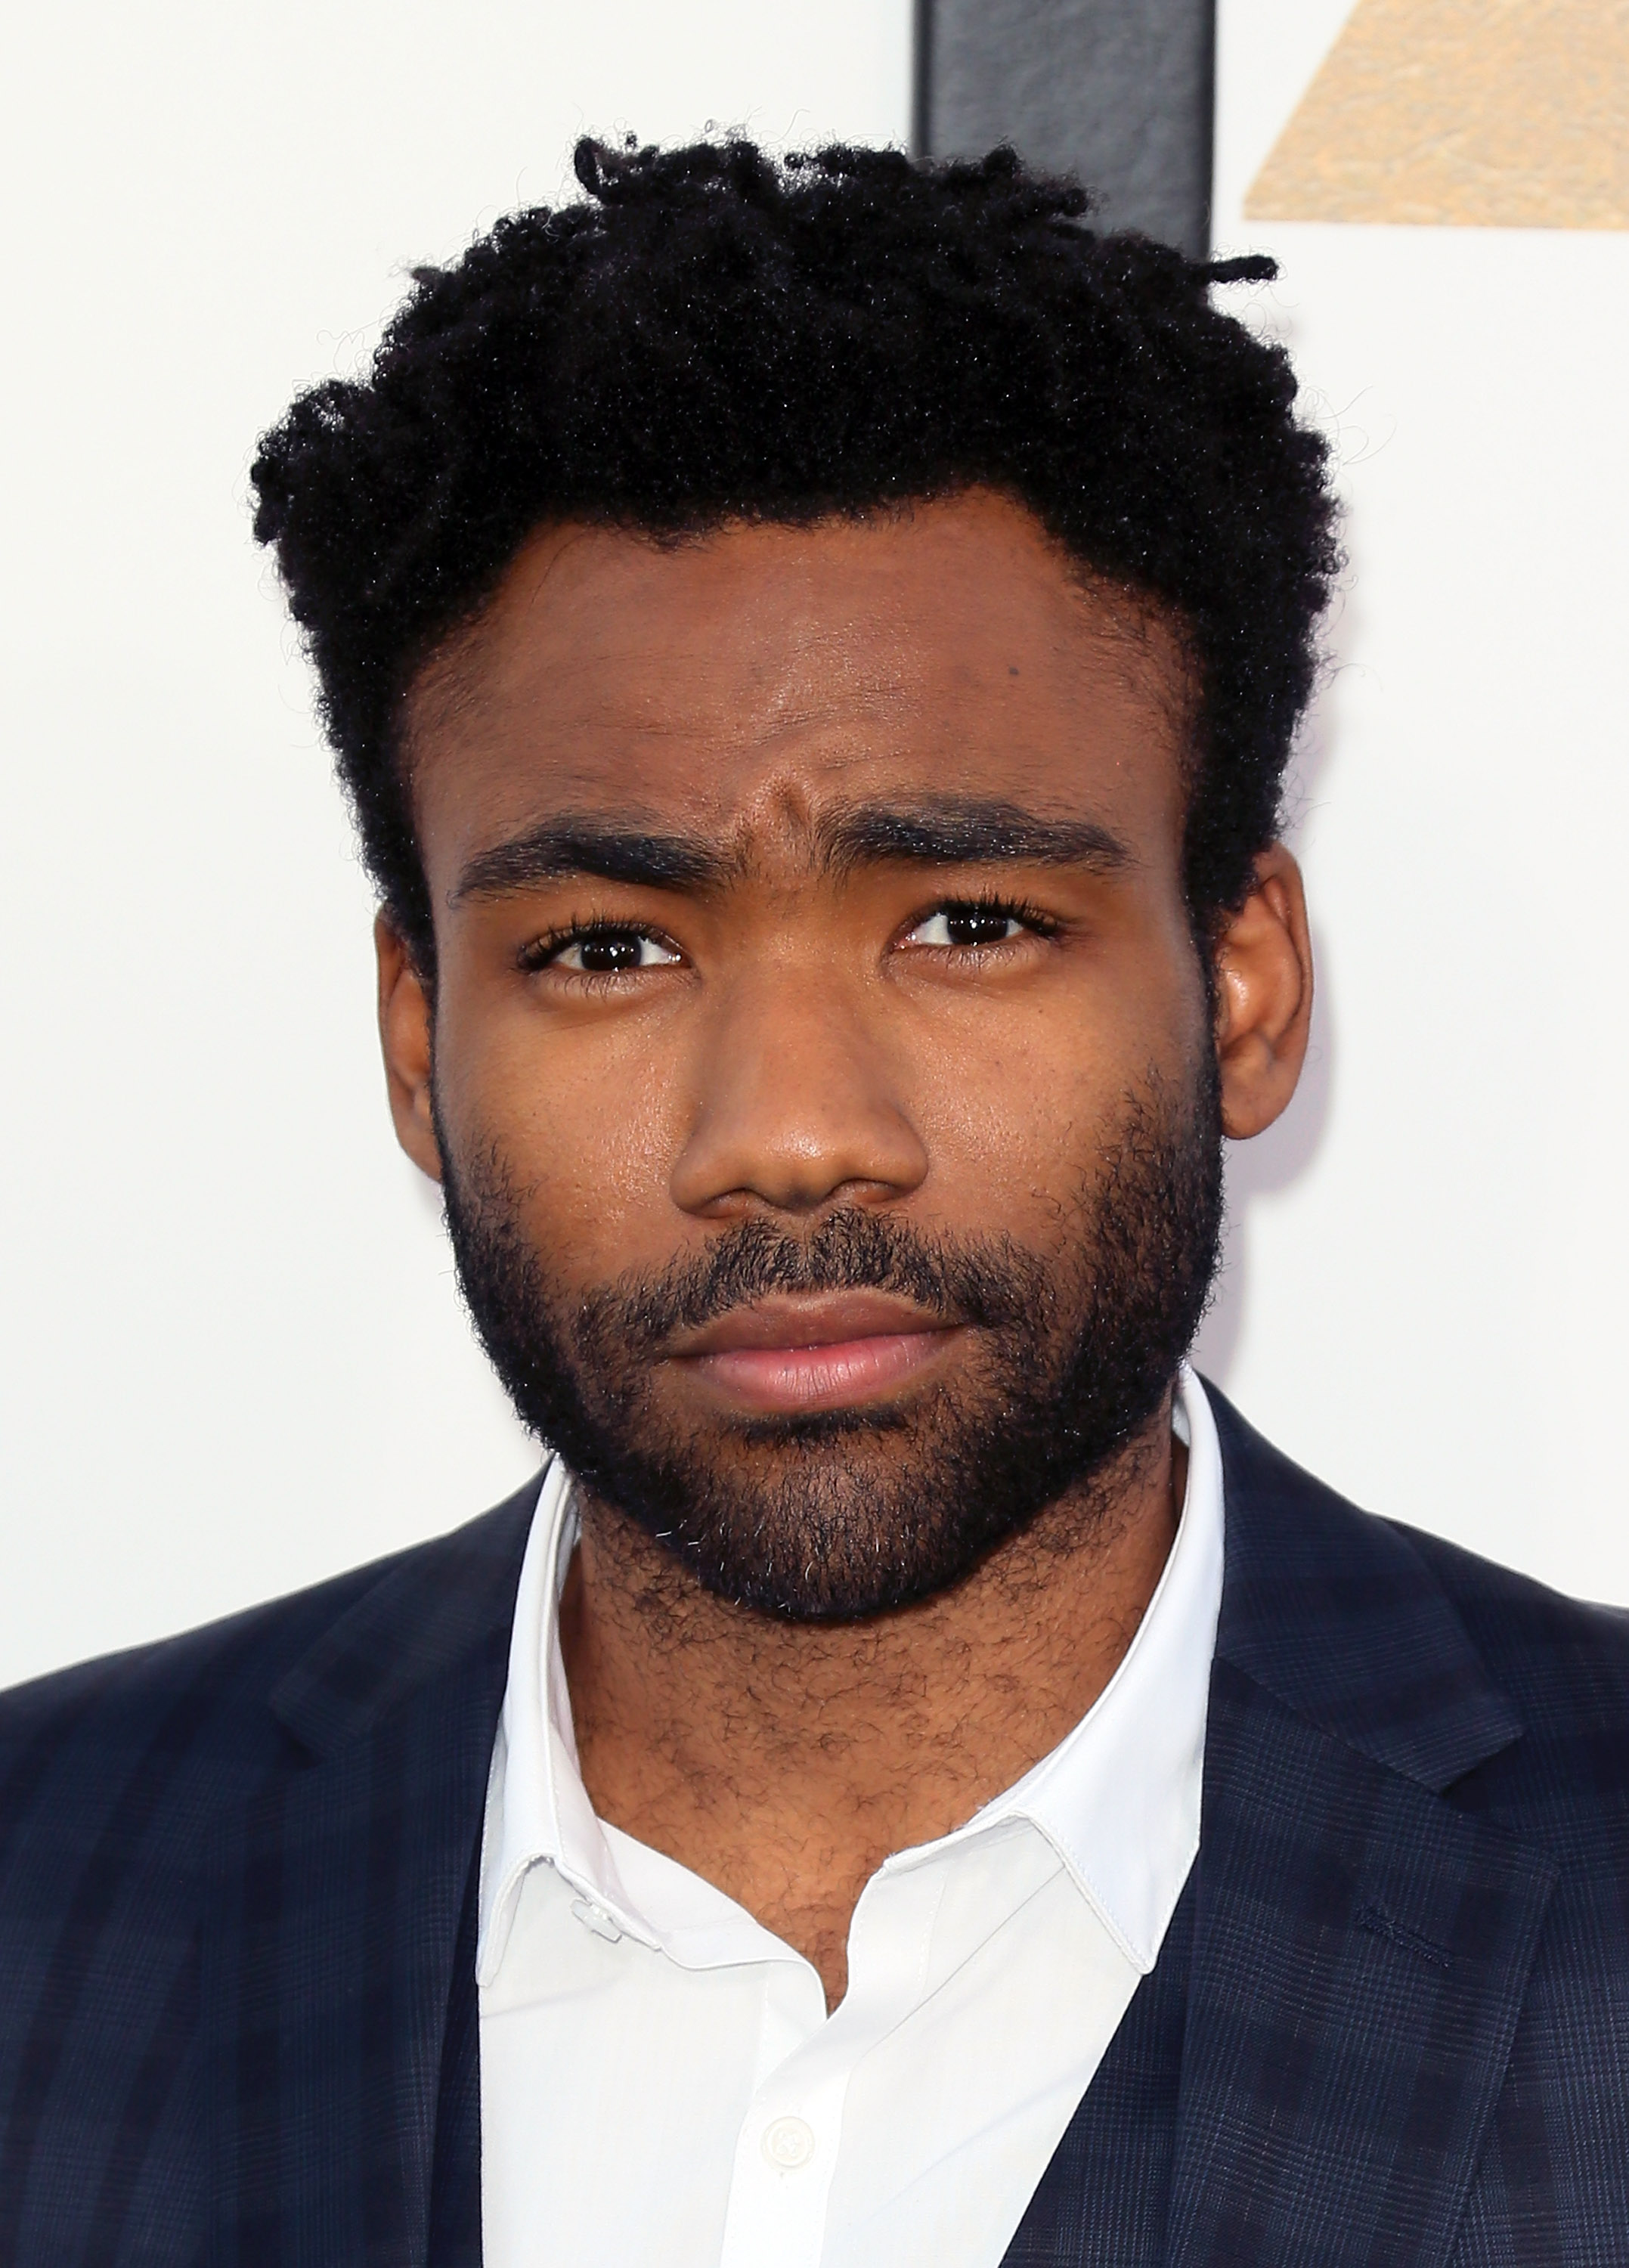 Donald Glover attends the premiere of Warner Bros. Pictures' "Magic Mike XXL" at the TCL Chinese Theatre IMAX on June 25, 2015 in Hollywood, California. (David Livingston&mdash;2015 David Livingston)